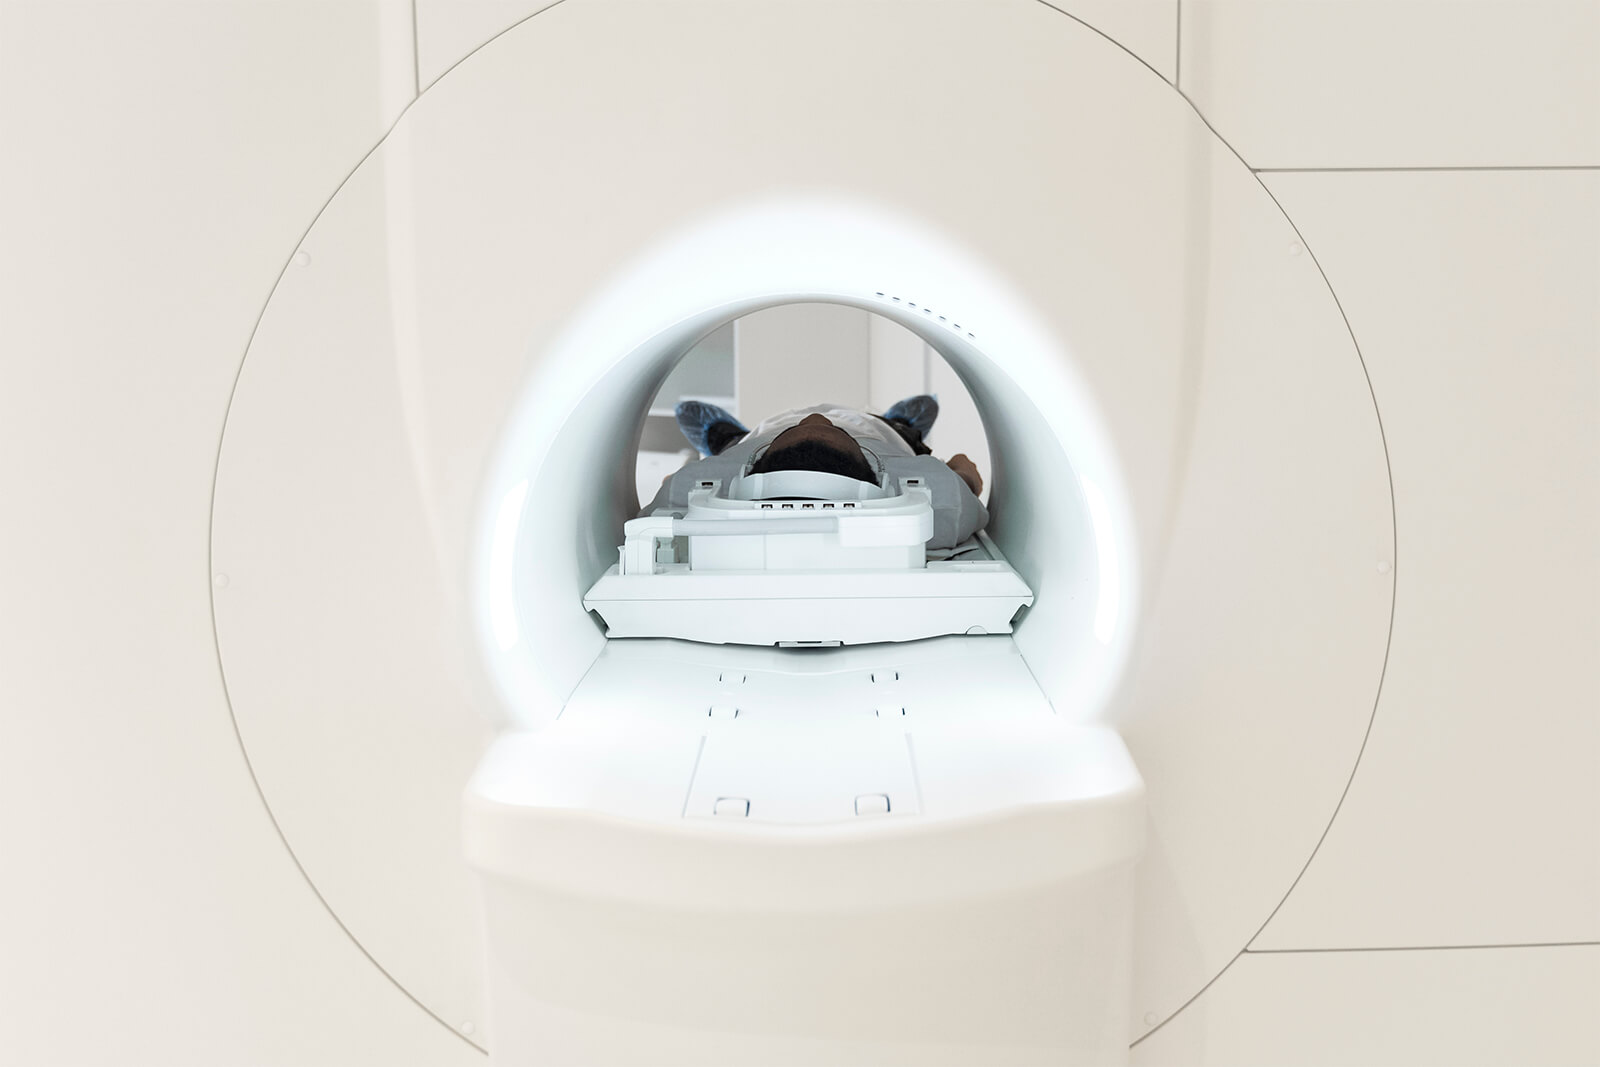 PET Scan vs. MRI: What’s the Difference?